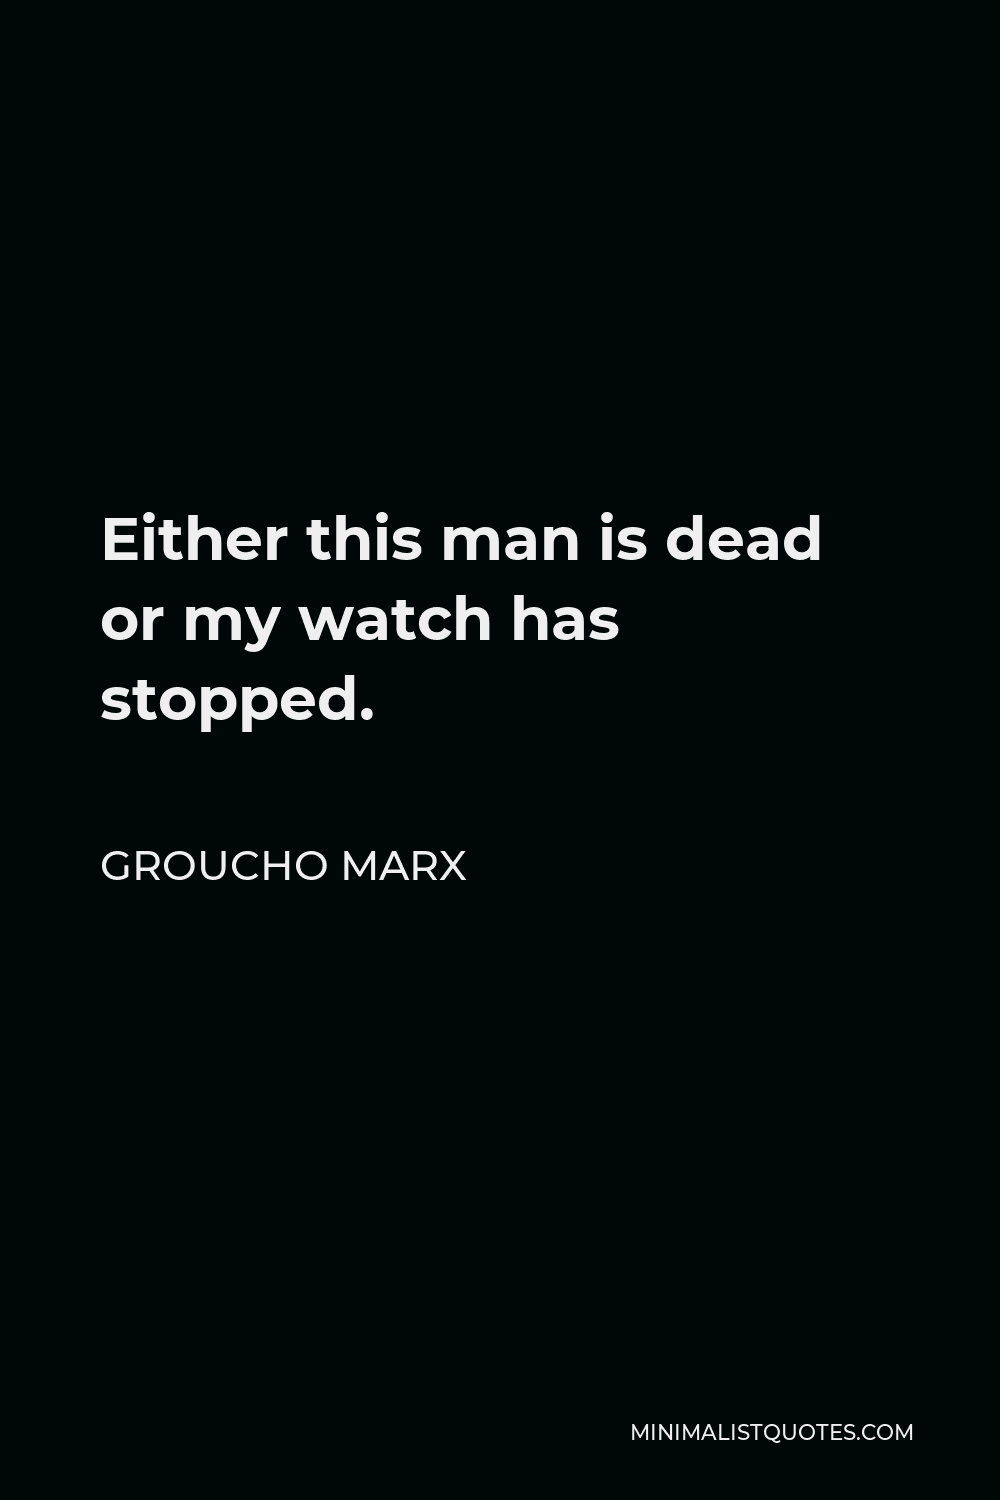 Groucho Marx Quote Either This Man Is Dead Or My Watch Has Stopped